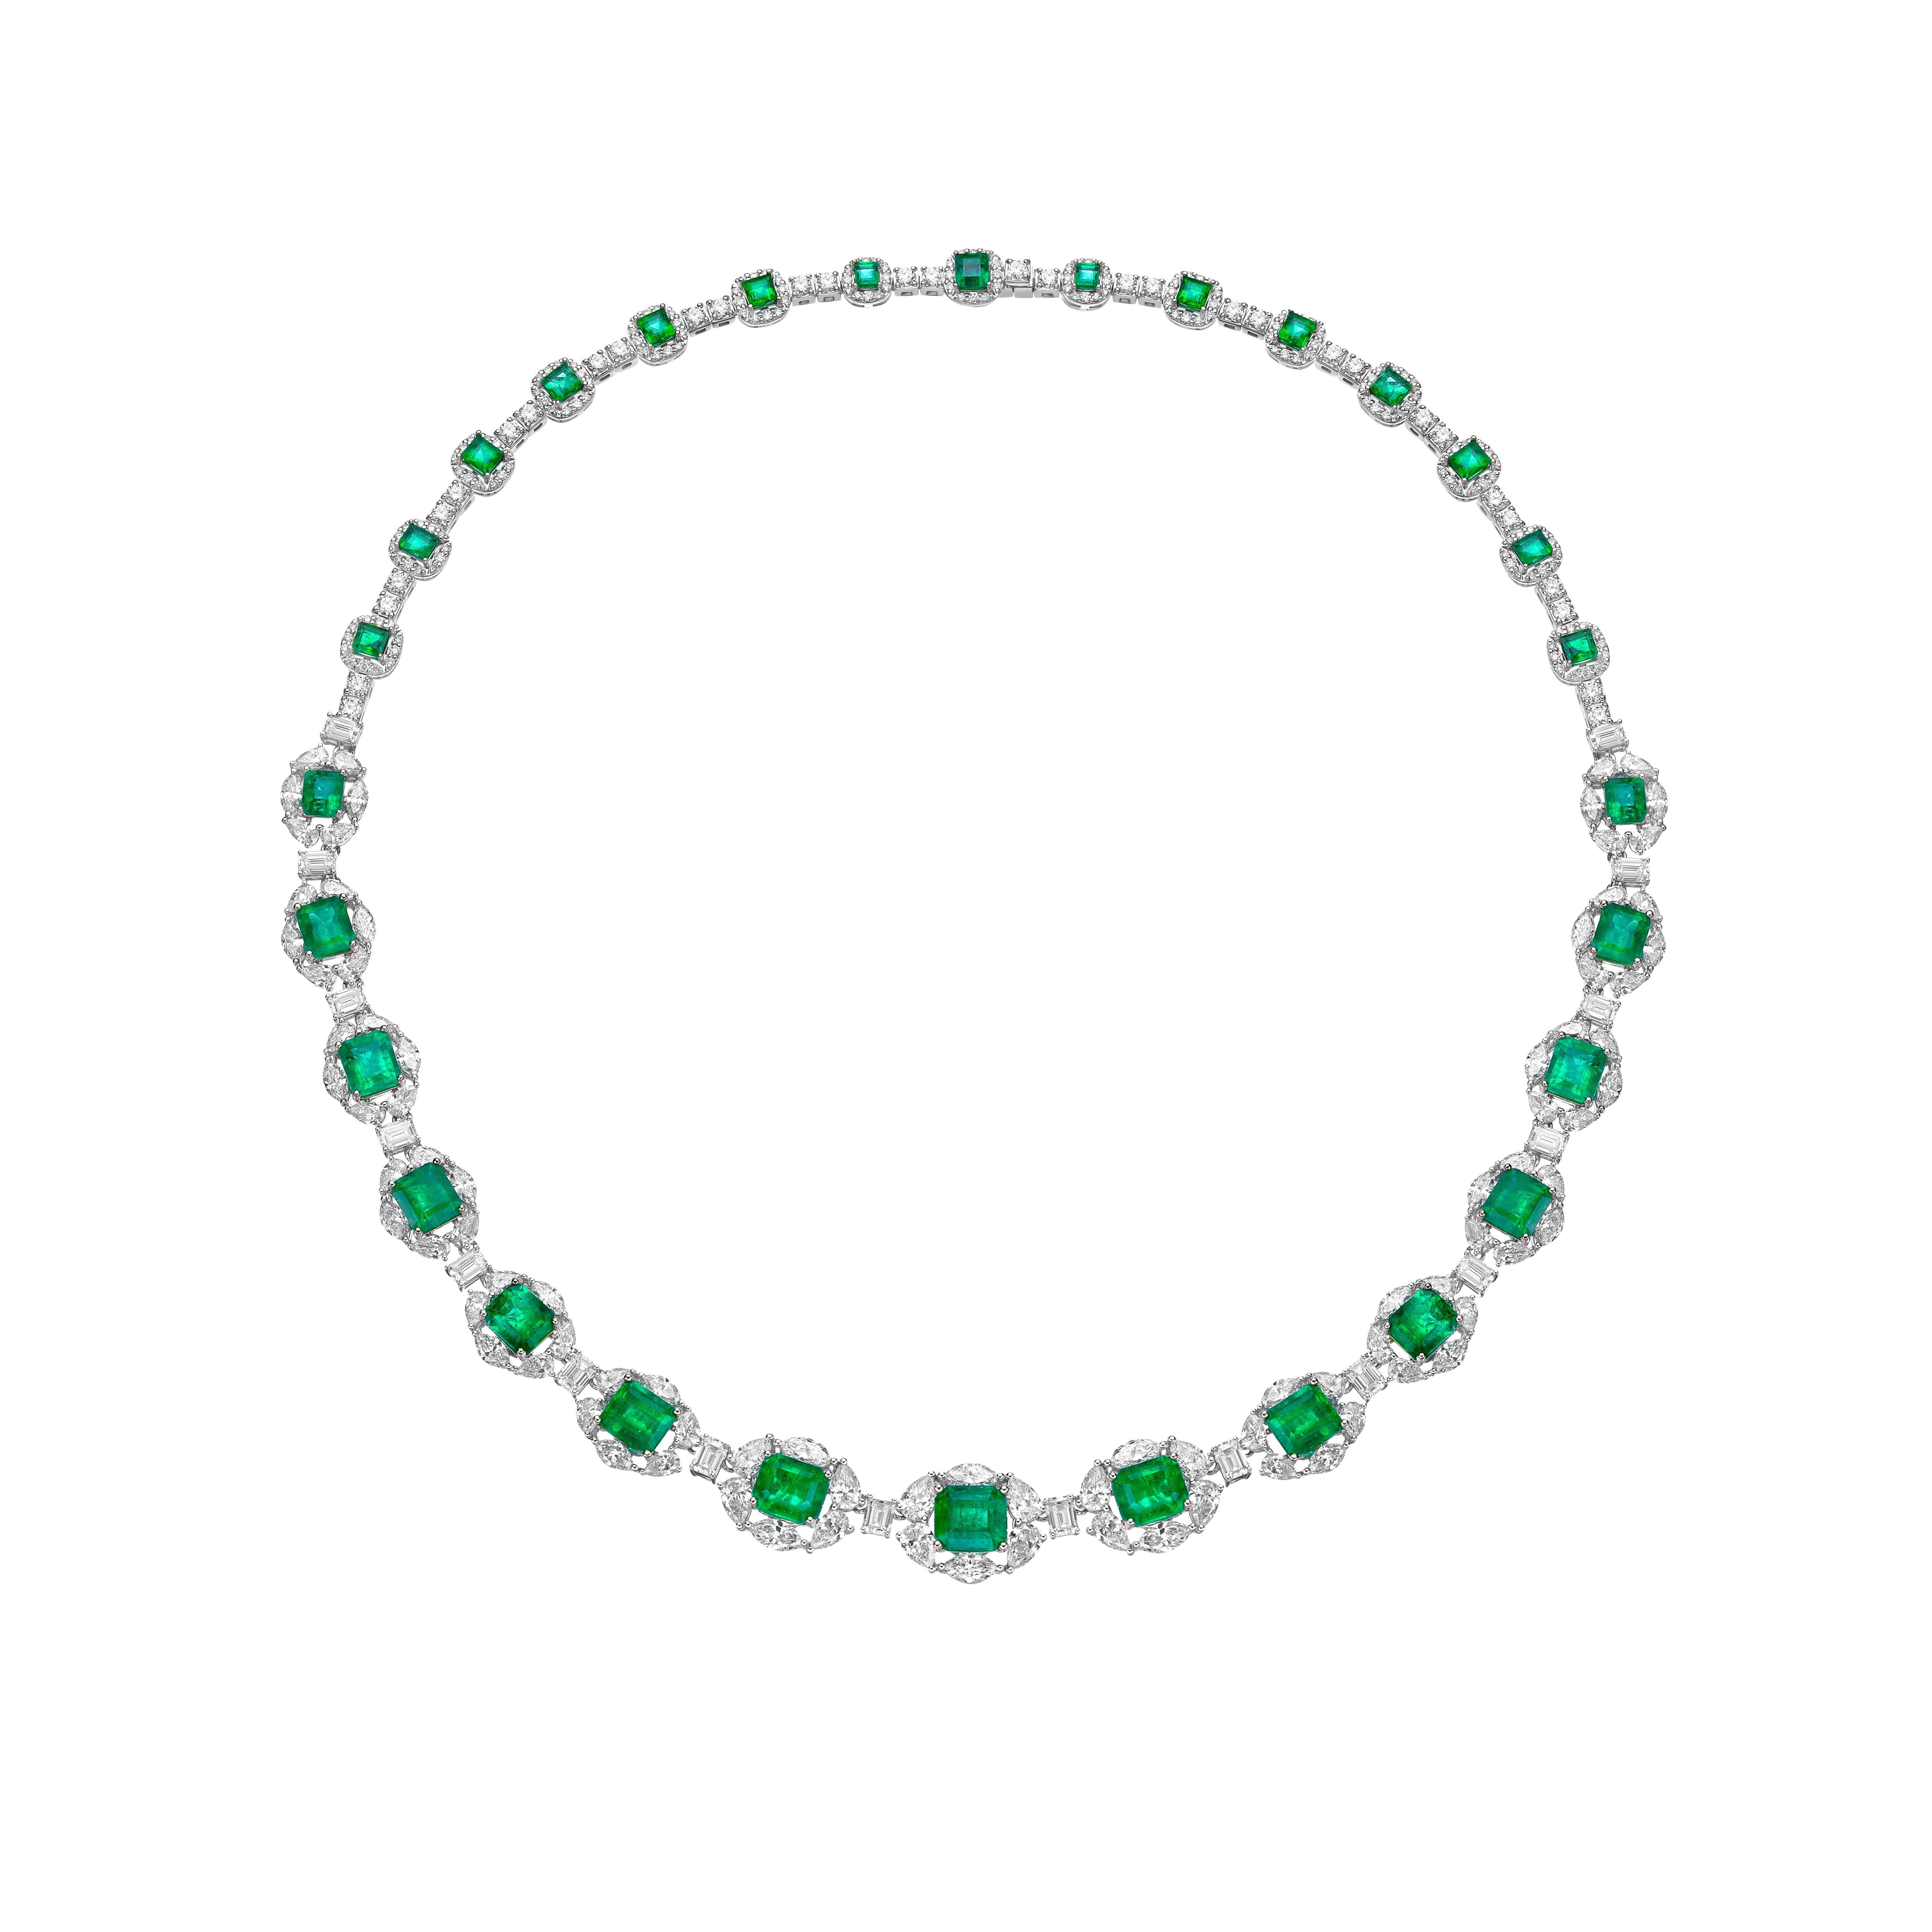 Contemporary 16.63 Carat Emerald Necklace in 18KWYG with White Diamond. For Sale